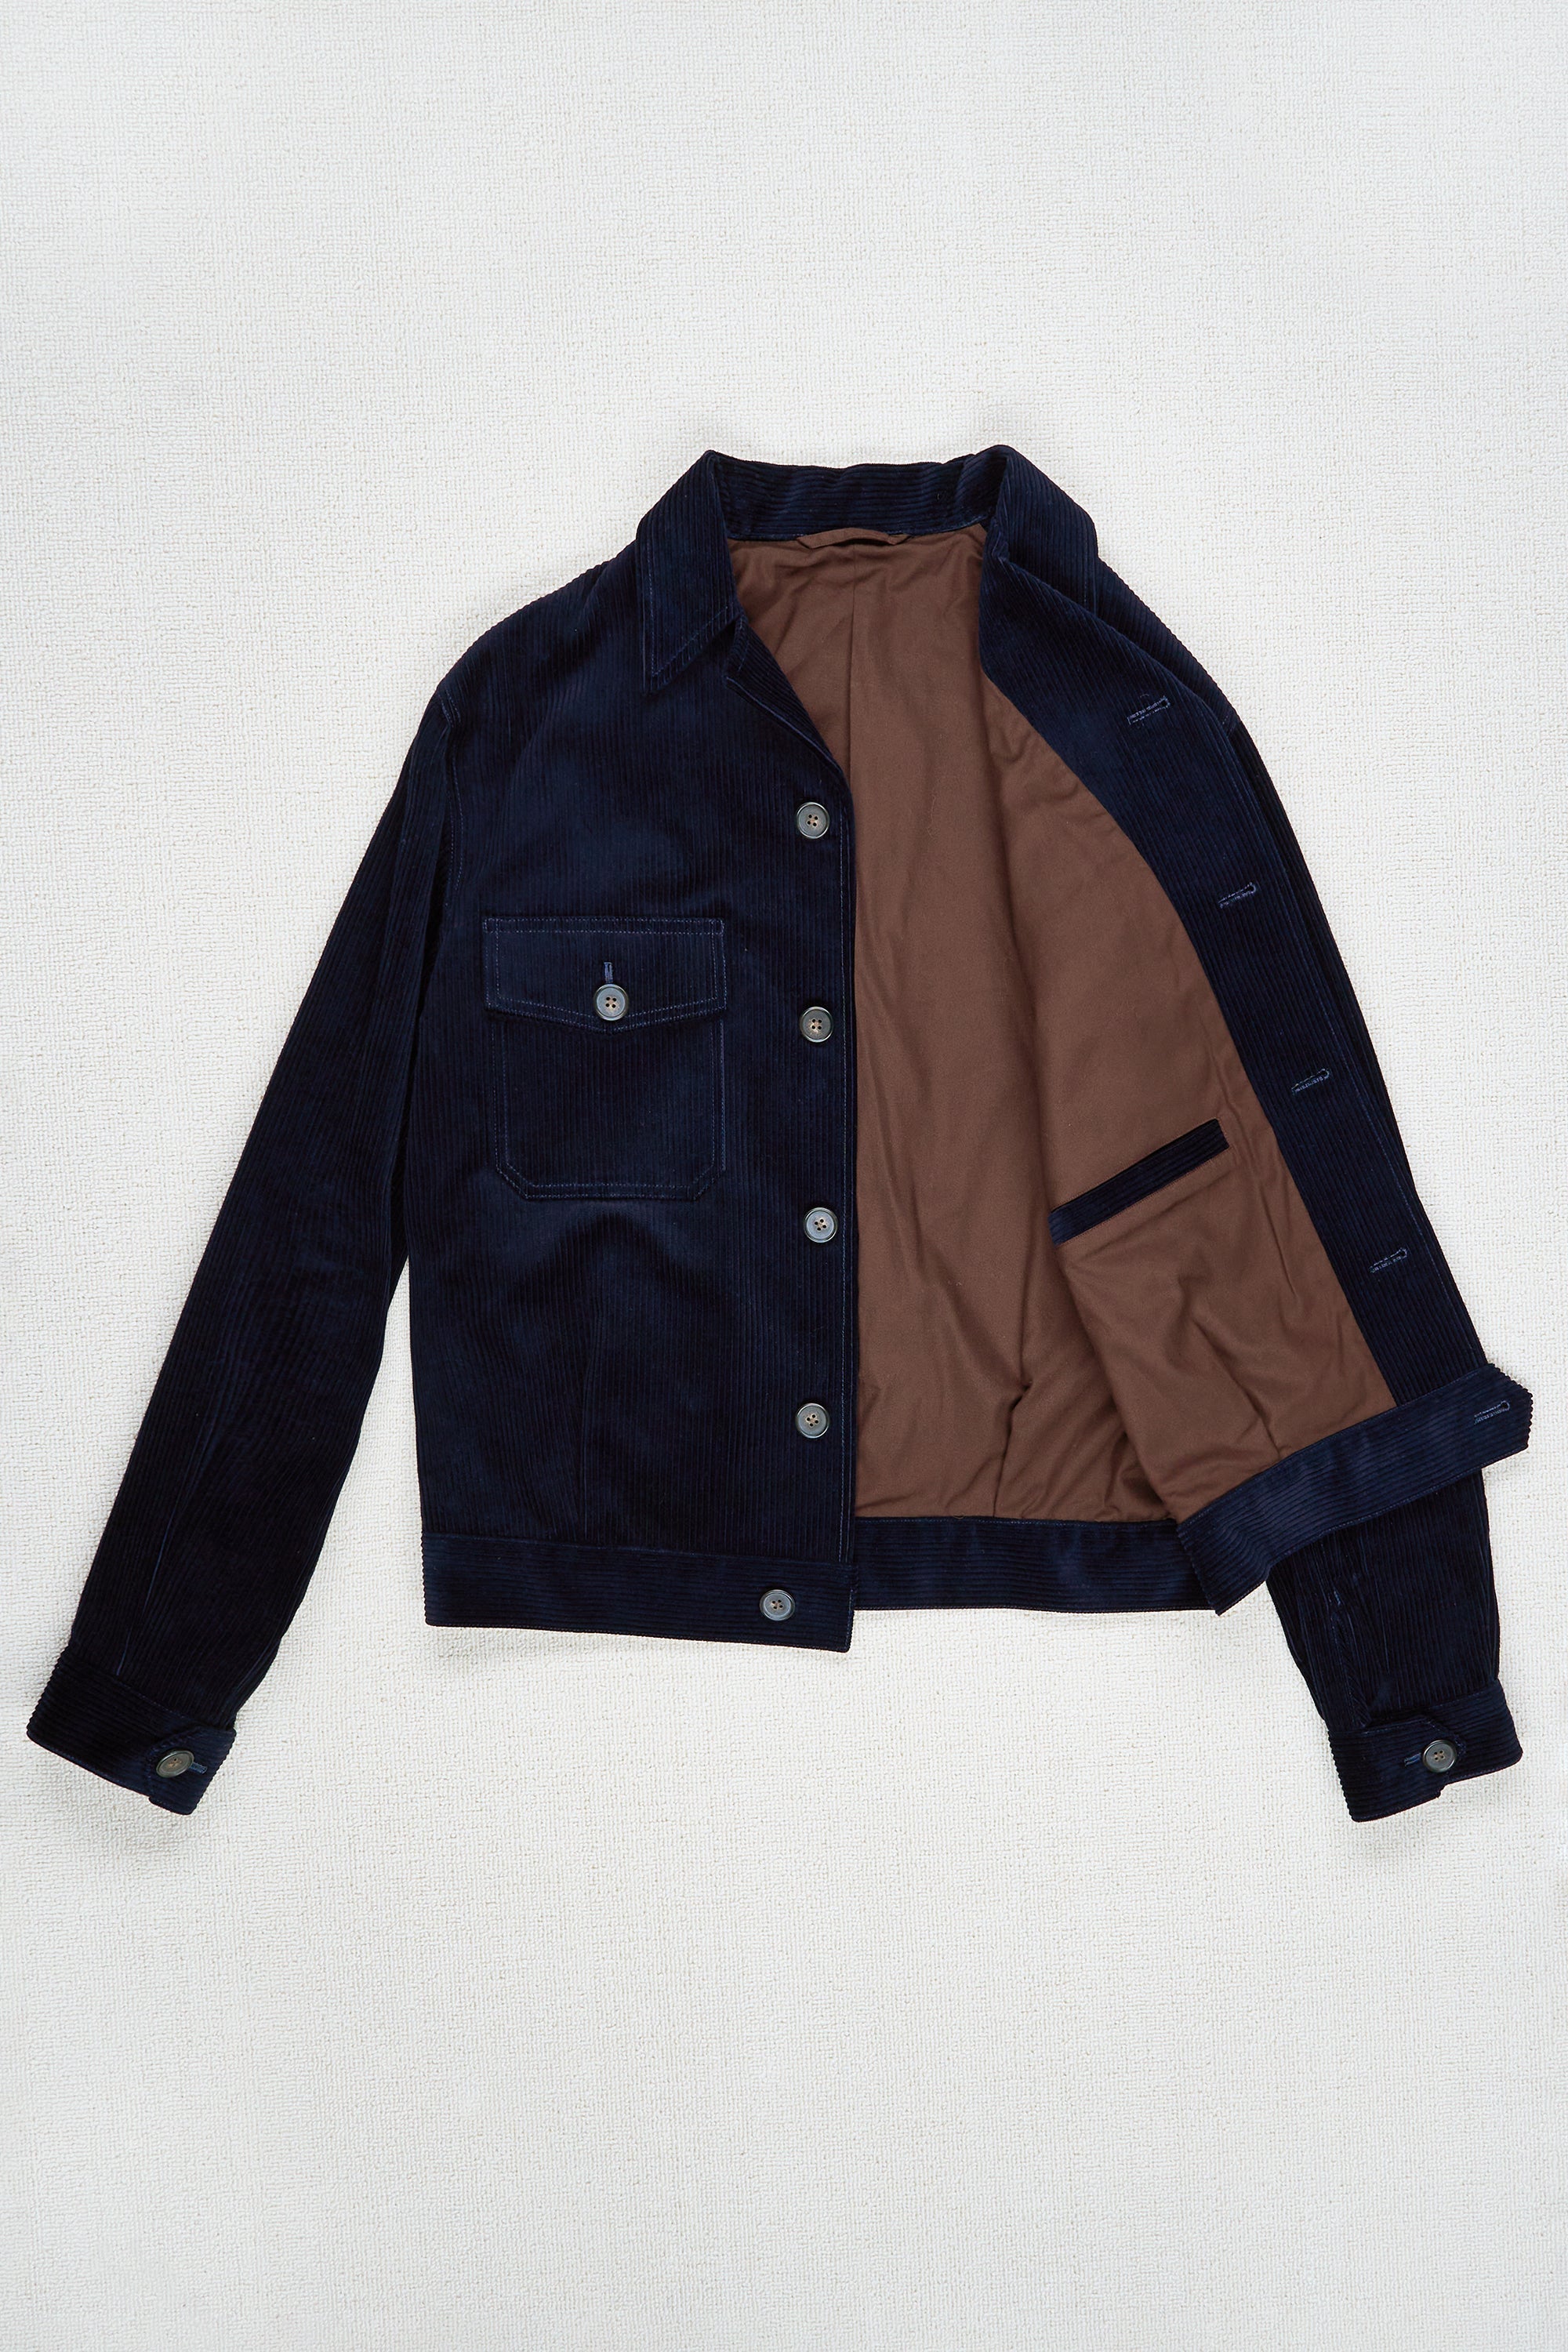 The Armoury 11-A011 Navy Corduroy Road Jacket